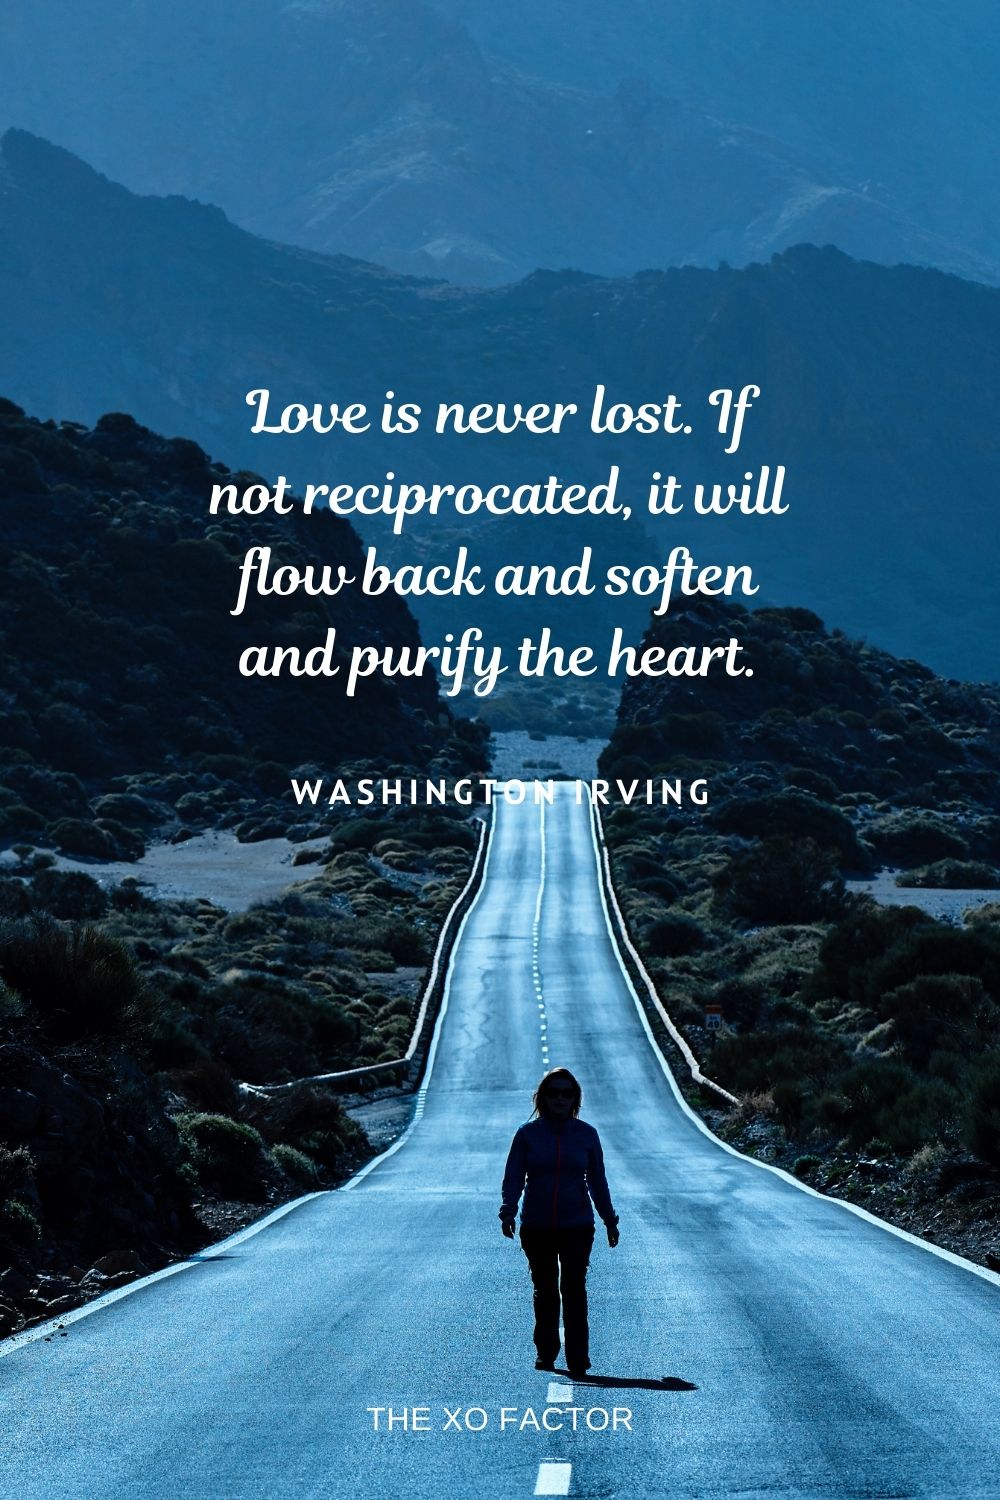 Love is never lost. If not reciprocated, it will flow back and soften and purify the heart. Washington Irving unrequited love quotes